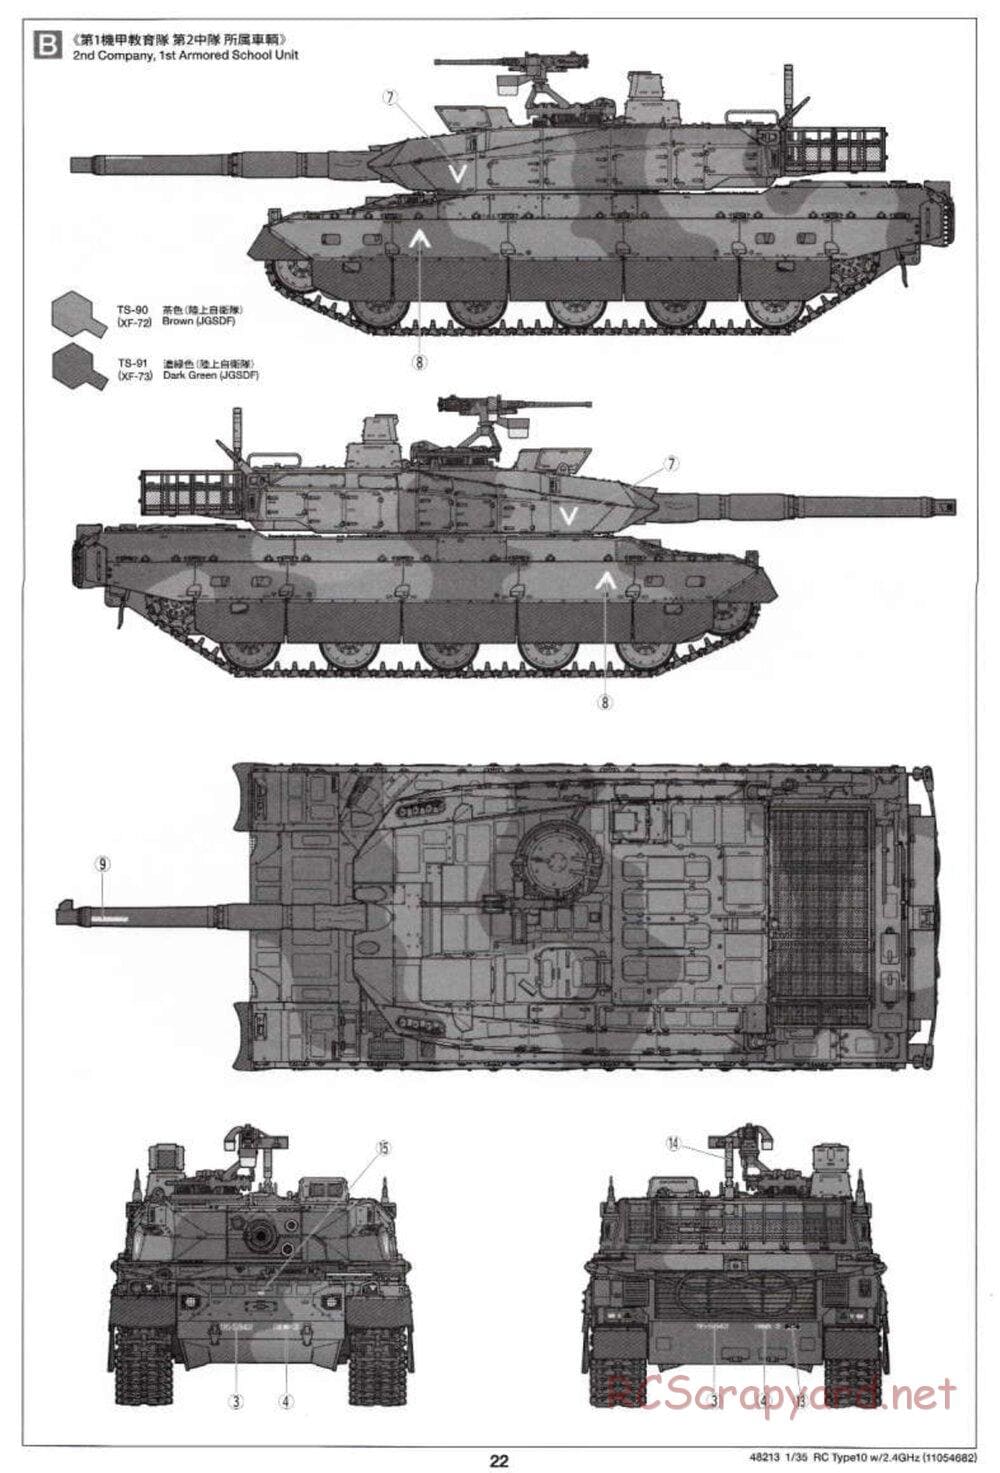 Tamiya - JGSDF Type 10 Tank - 1/35 Scale Chassis - Manual - Page 22